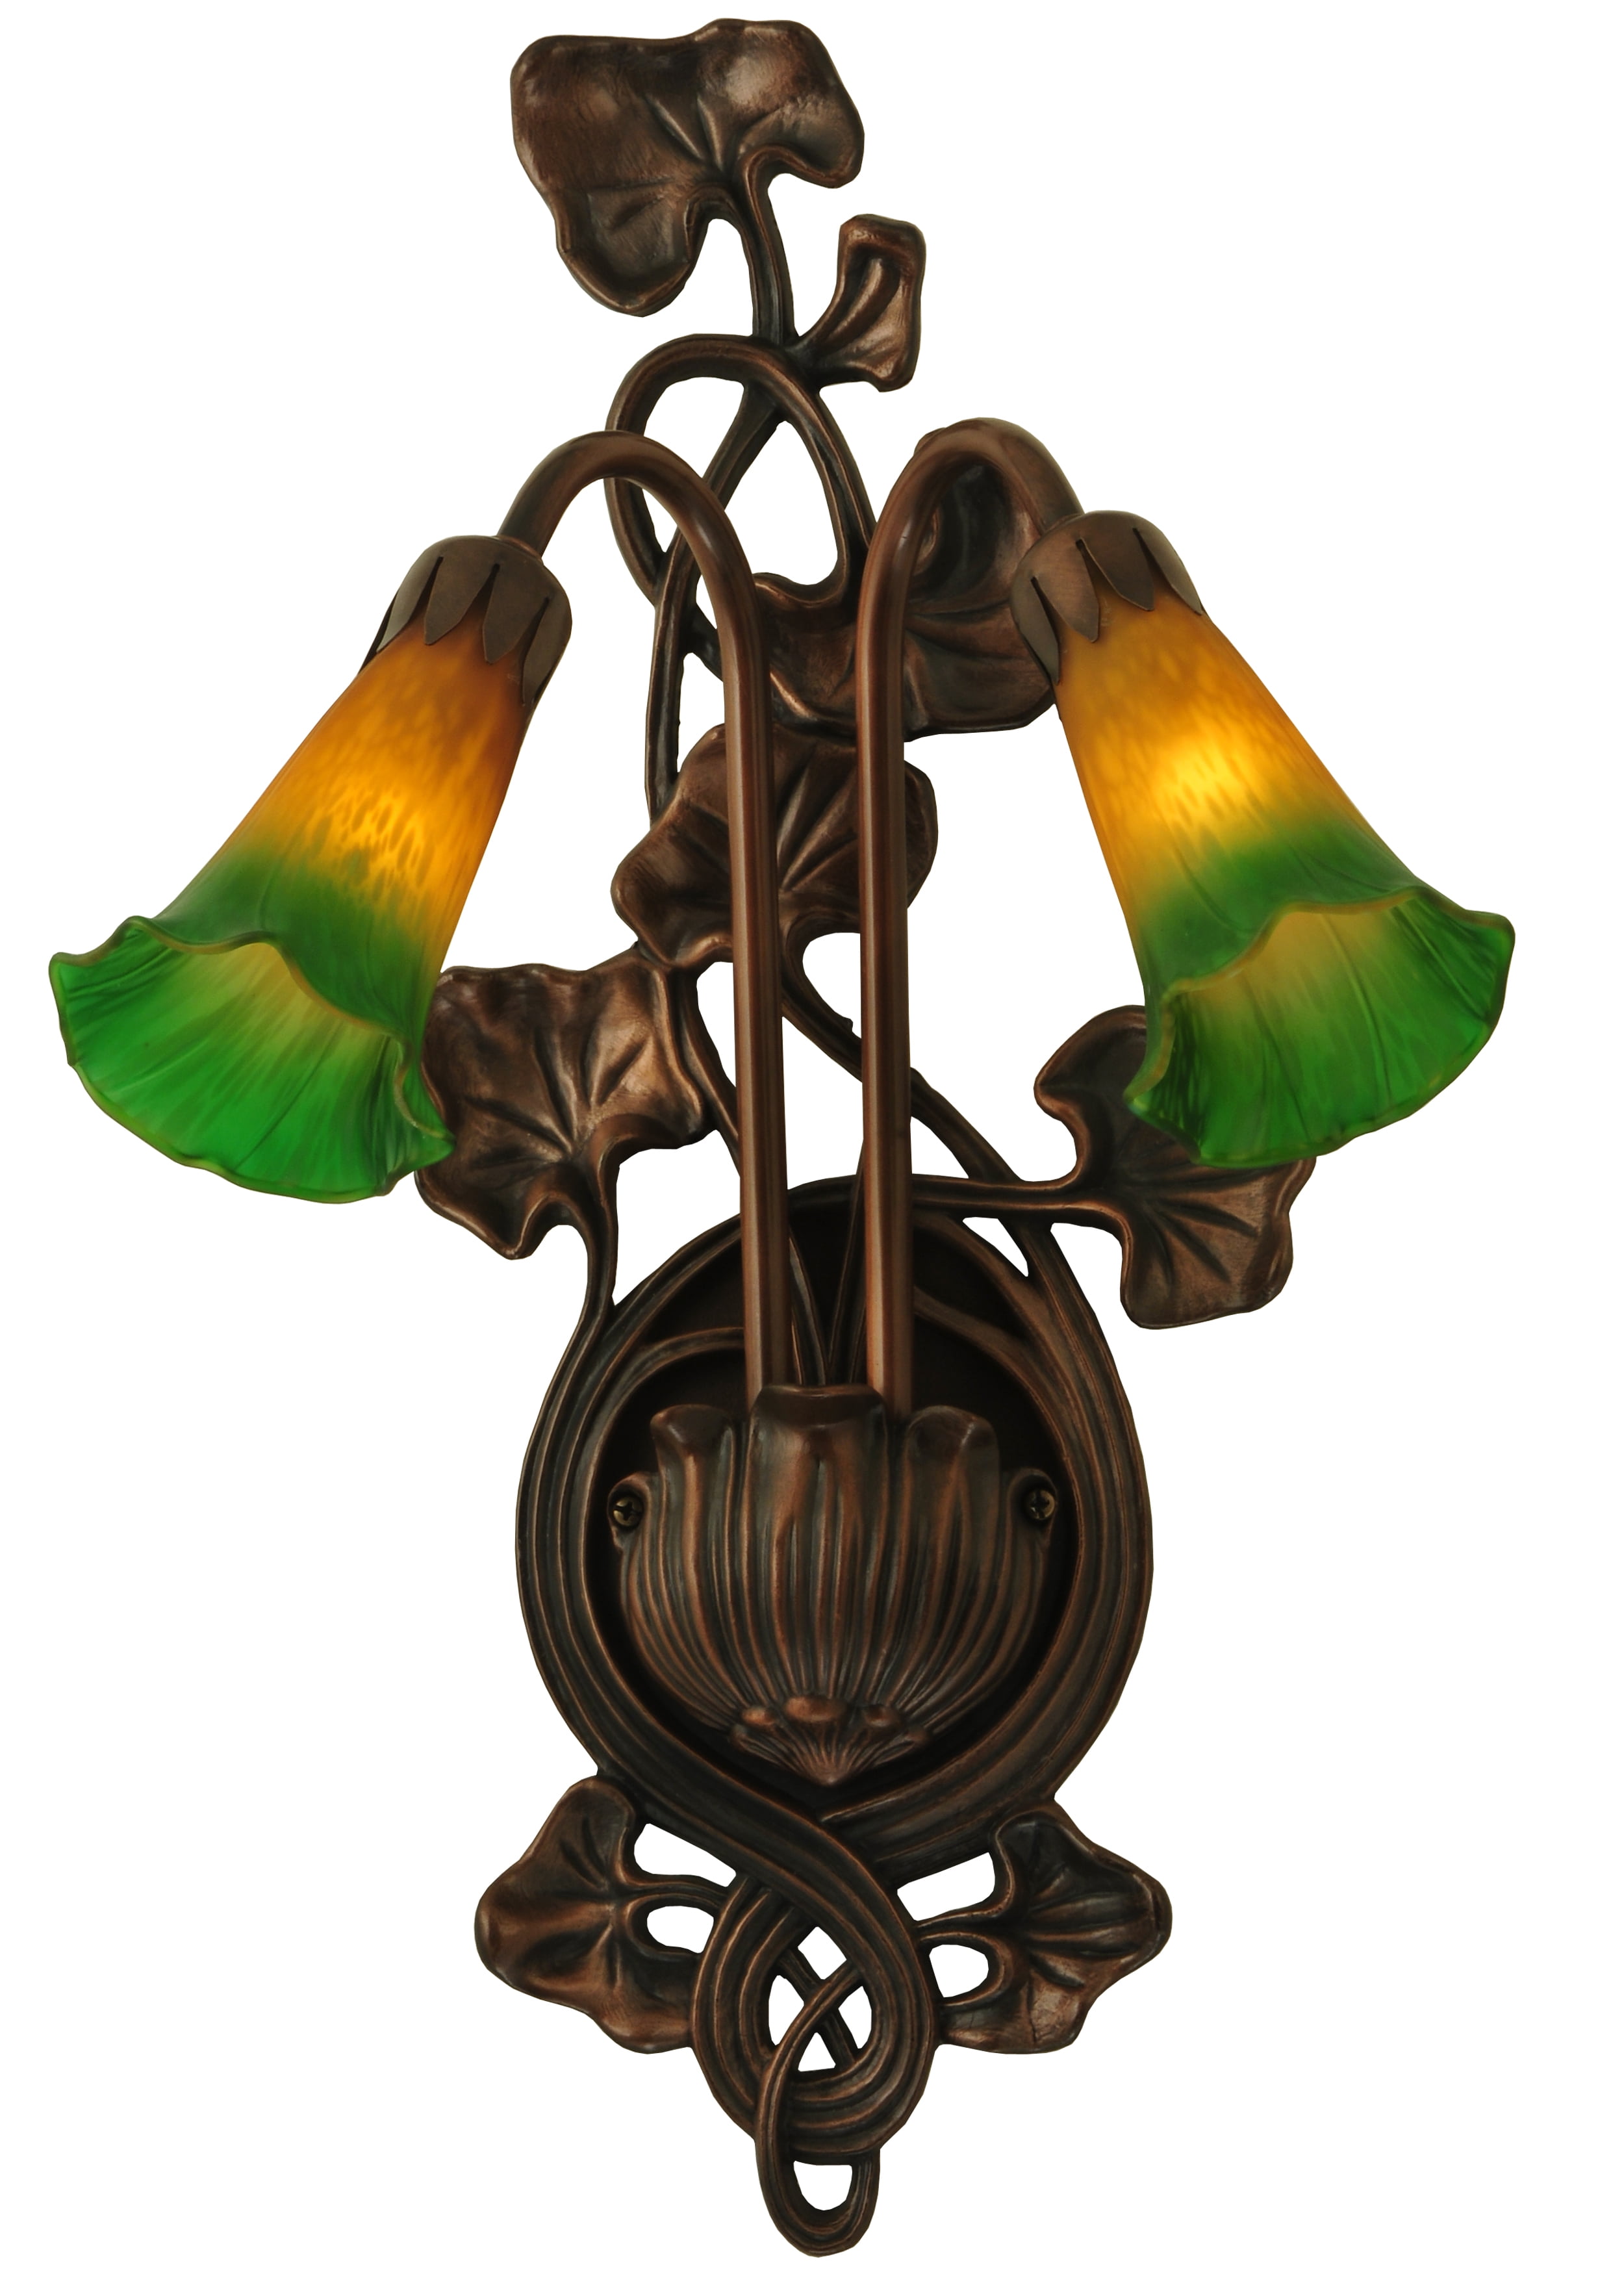 11"W Amber/Green Pond Lily 2 Light Wall Sconce